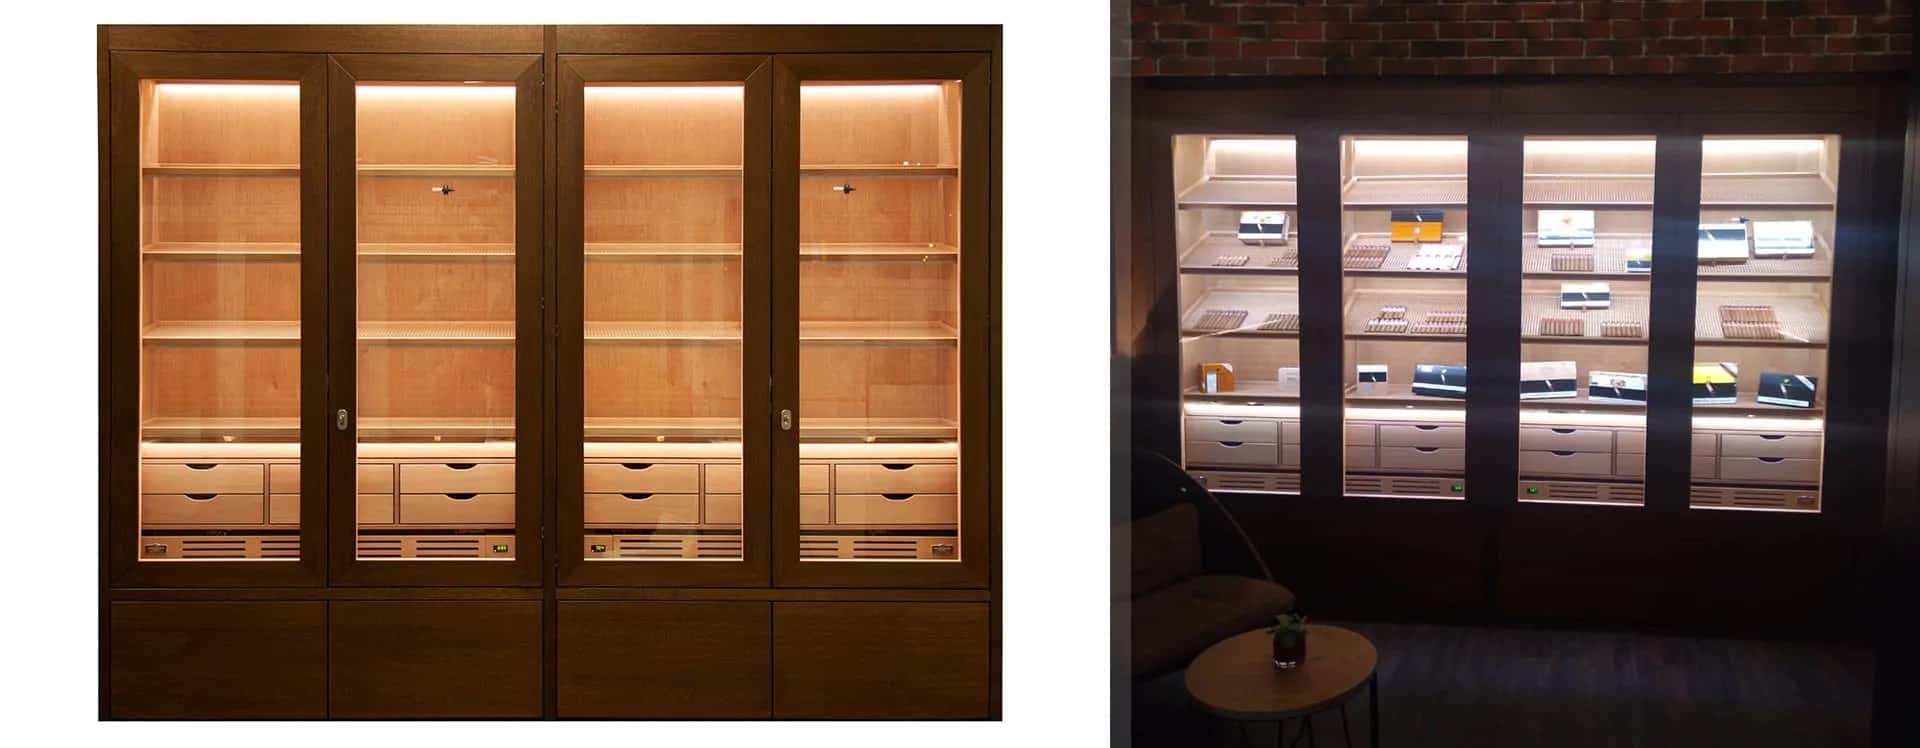 gerber-humidor-caesers-bluewaters-dubai-built-in-solution-humidification